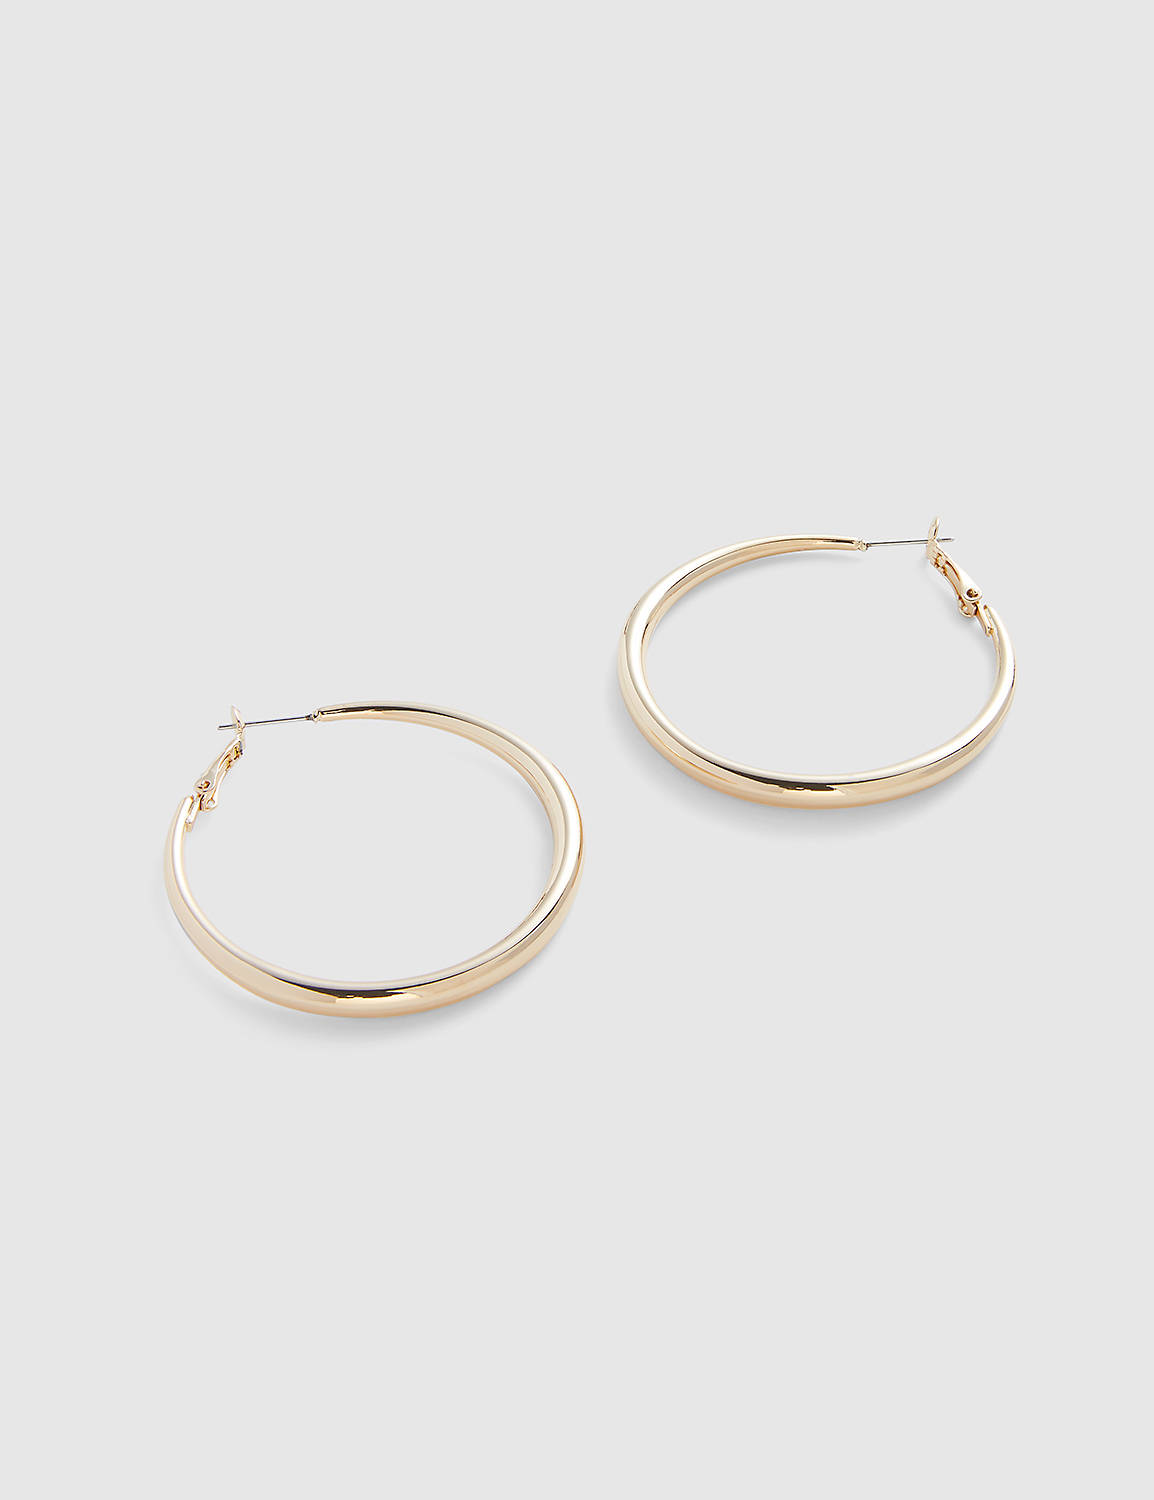 Large Rounded Hoop Earrings Product Image 1